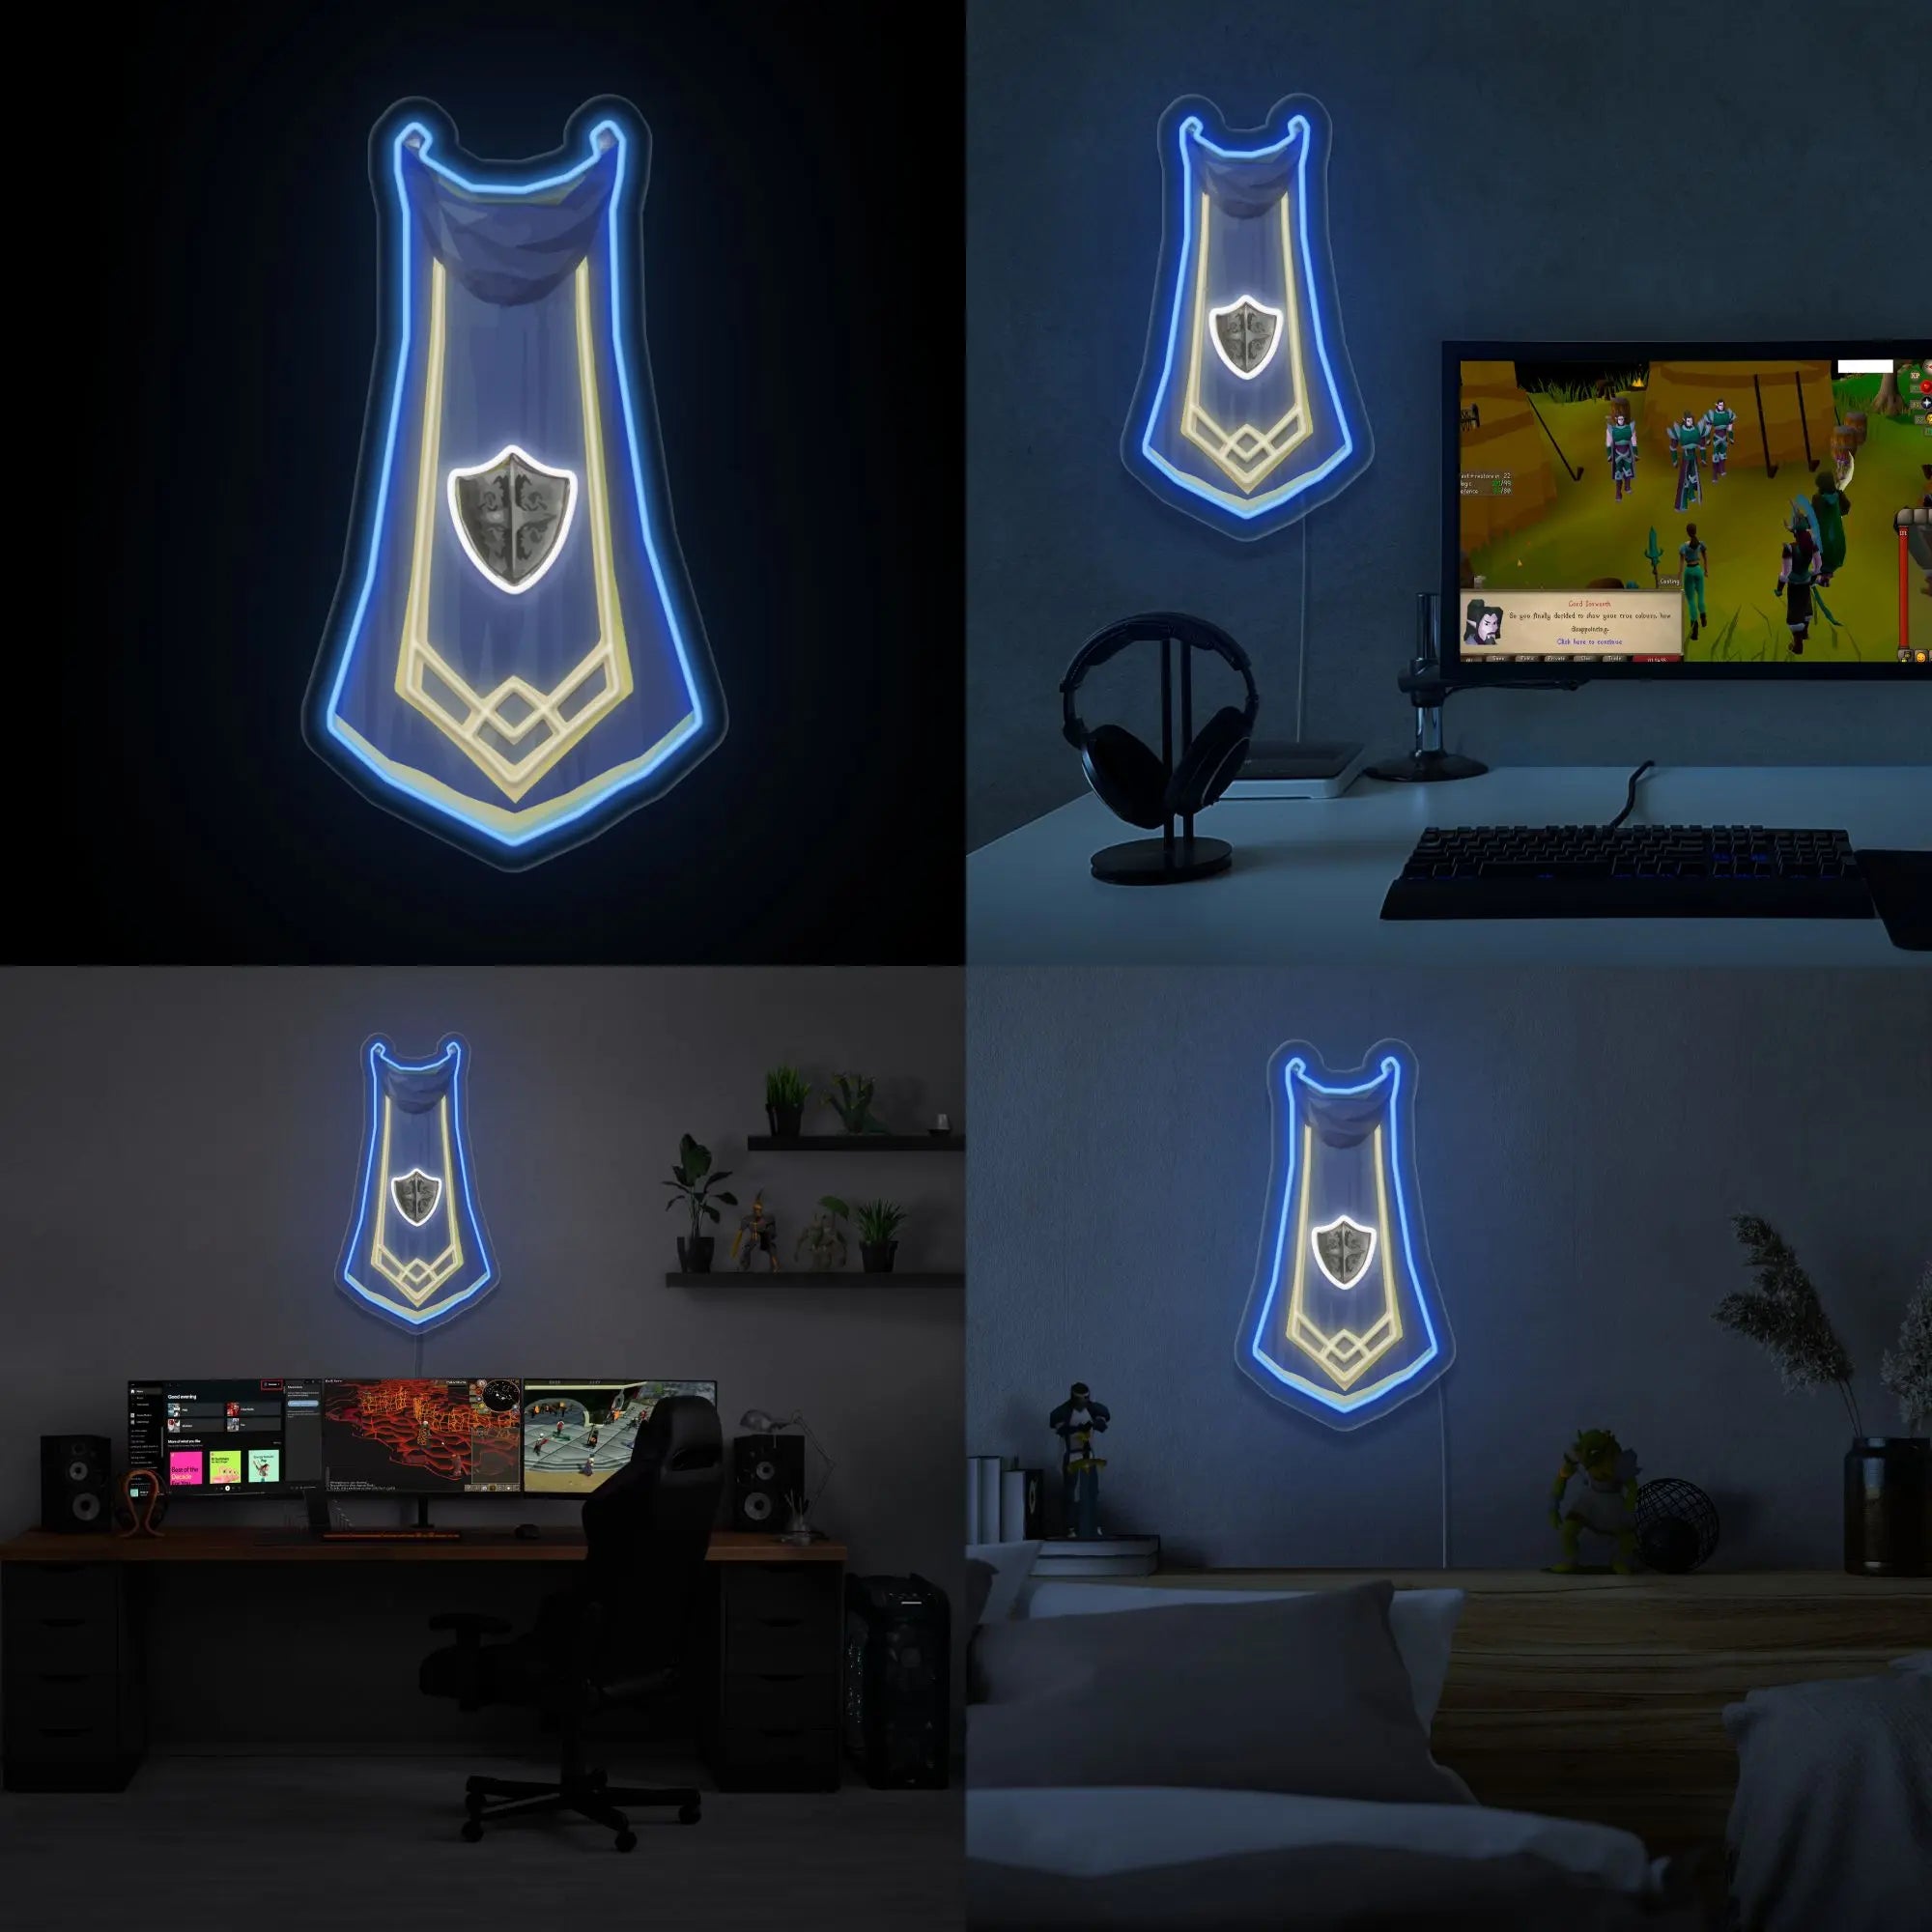 RS3 Defence Cape LED neon sign (master cape) showcased proudly. This LED neon sign, featuring the Defence cape from RS3, adds a touch of gaming nostalgia to any space.